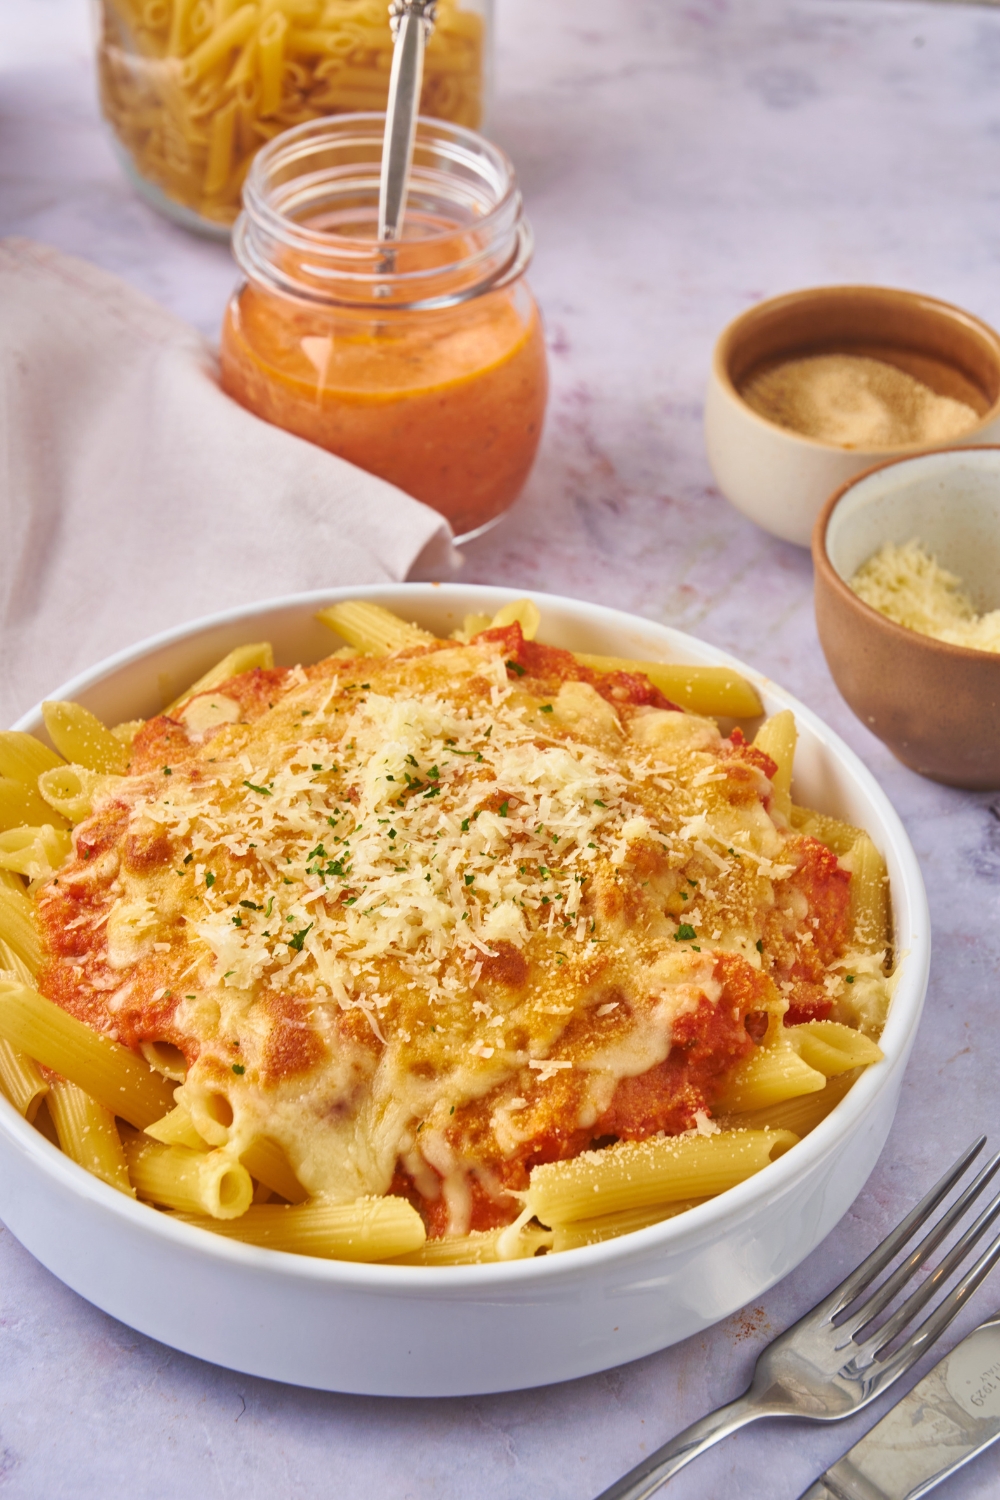 A bowl of ziti topped with a creamy marinara sauce, shredded cheese, and fresh herbs. There is a bowl of creamy marinara and small bowls of shredded cheese next to it.